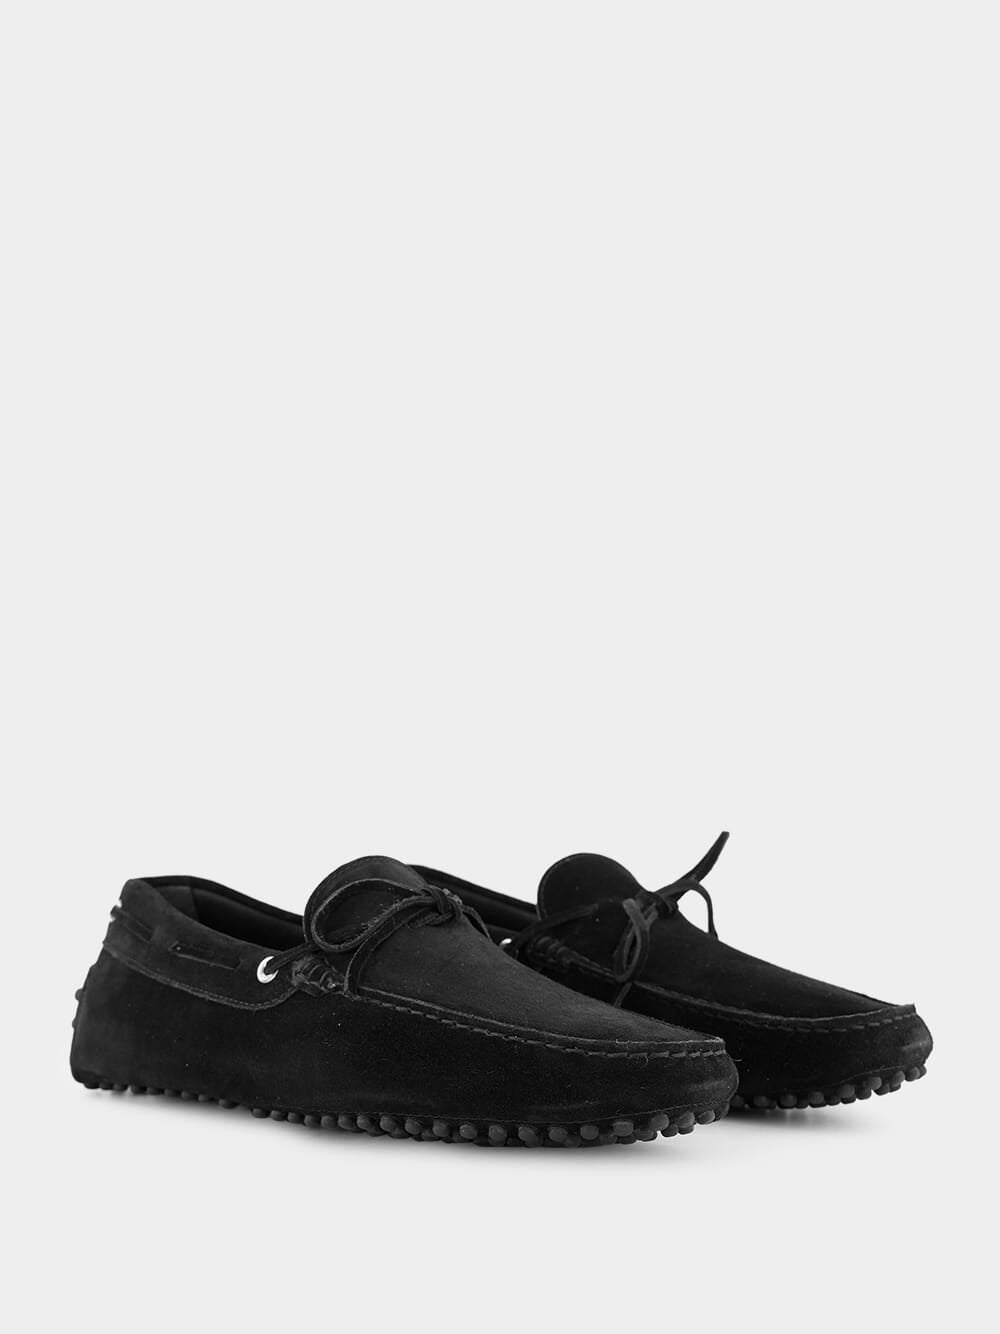 Black Suede Driving Shoes